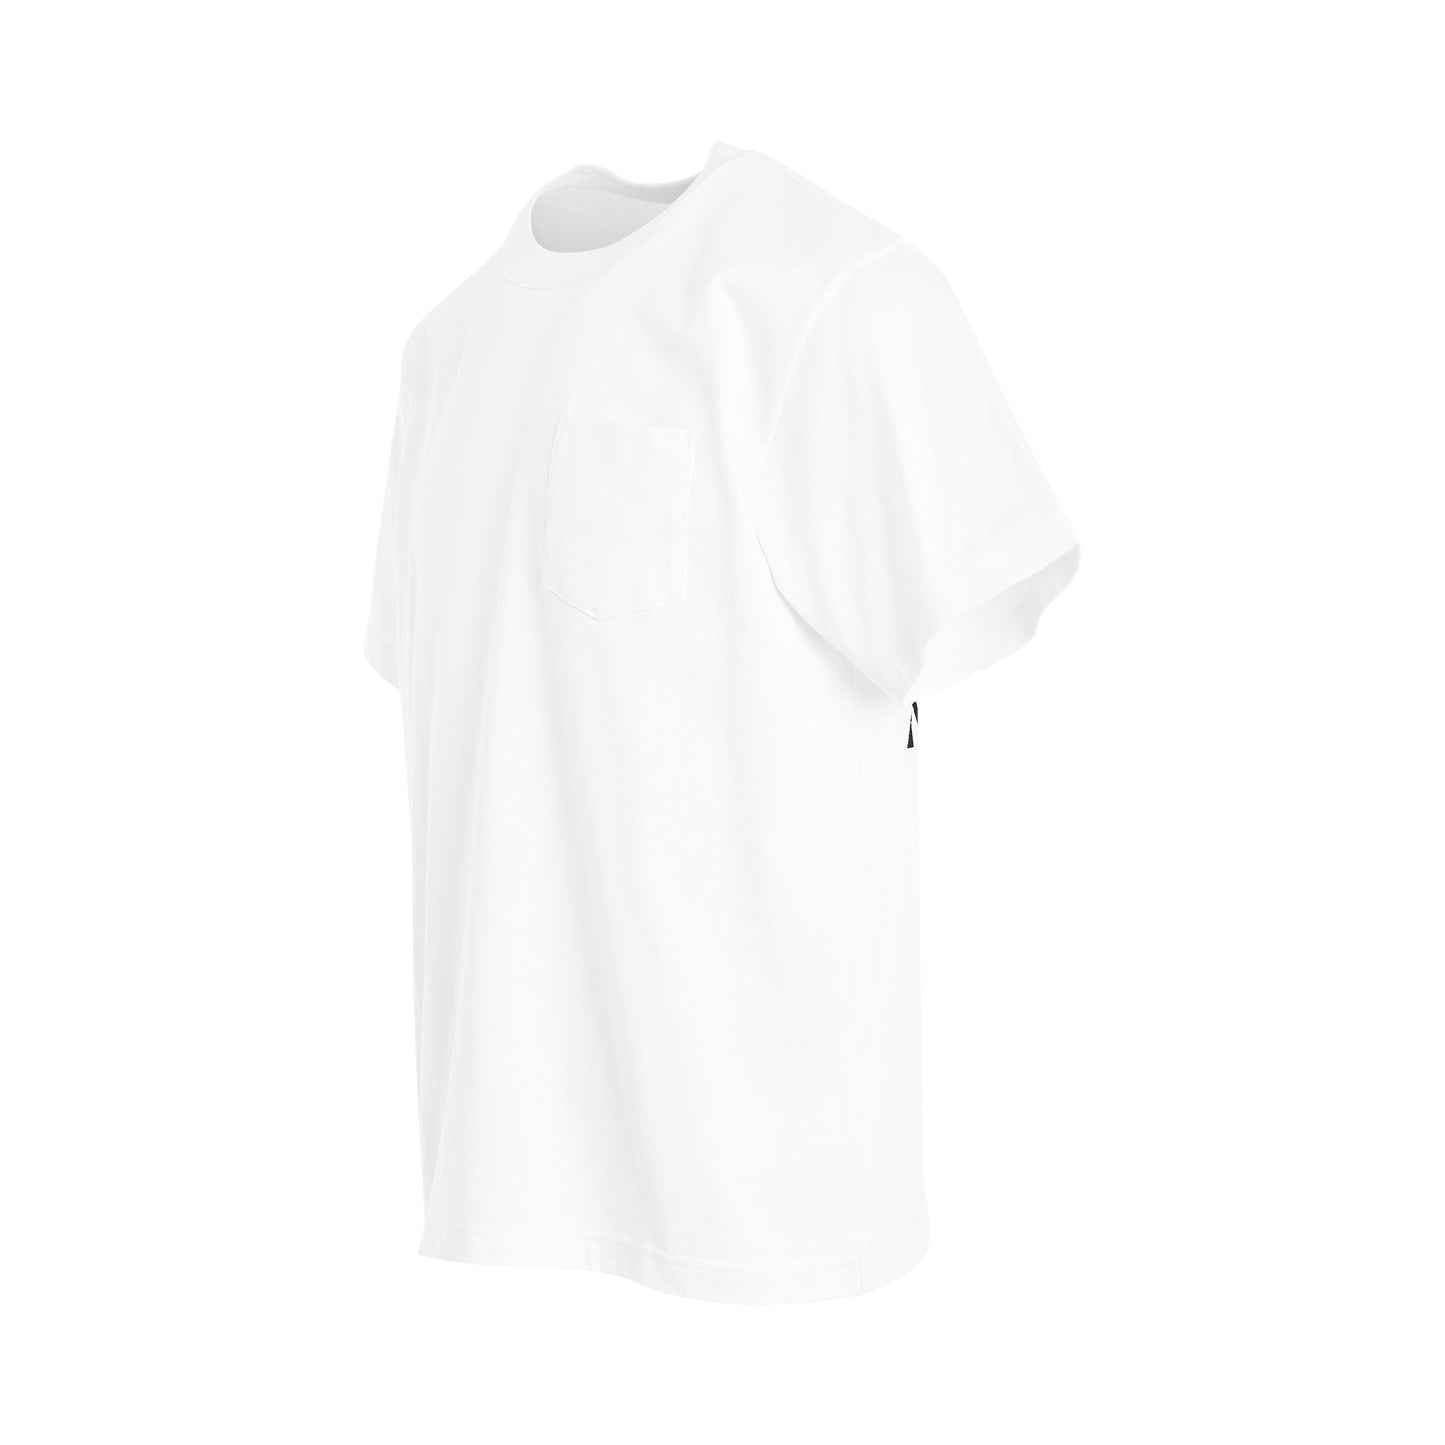 "Simple" Print T-Shirt in White